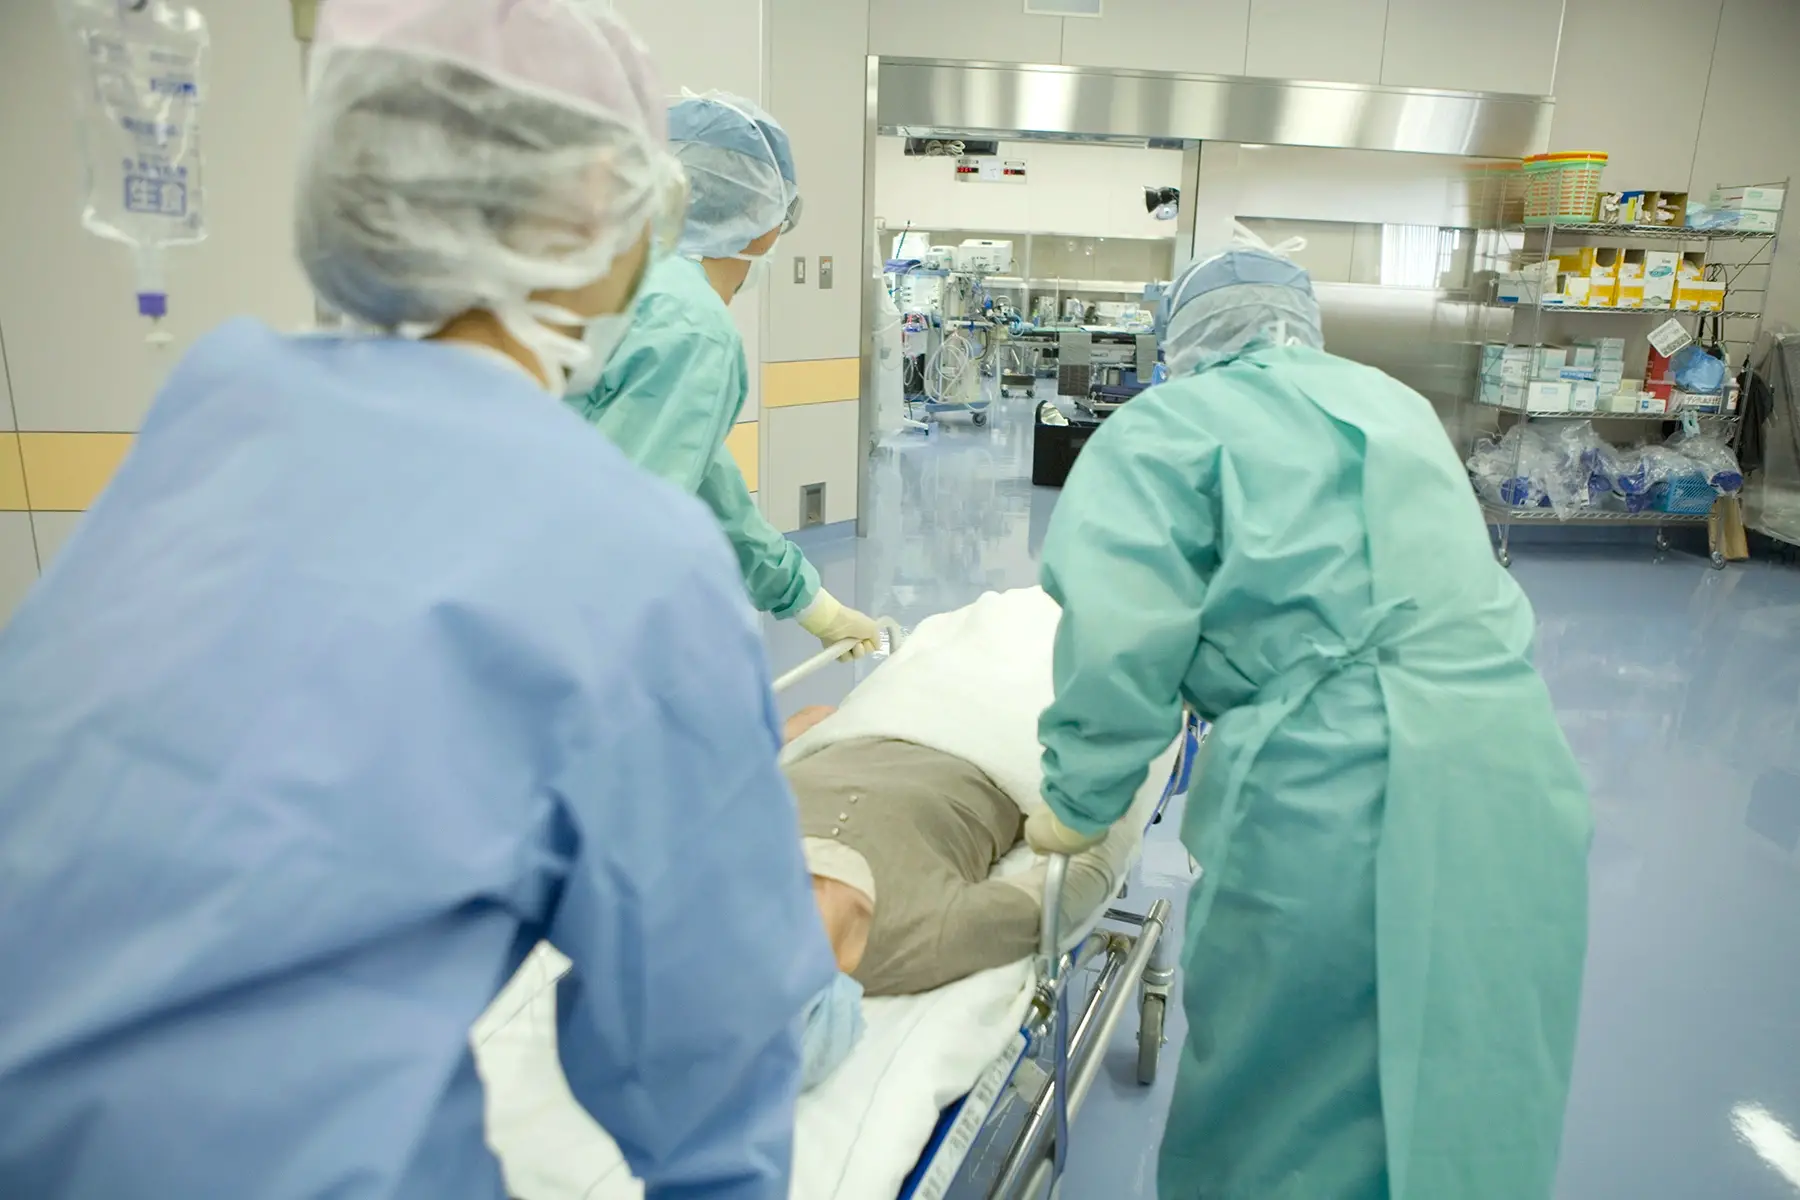 Doctors push patient on a gurney to an operating room